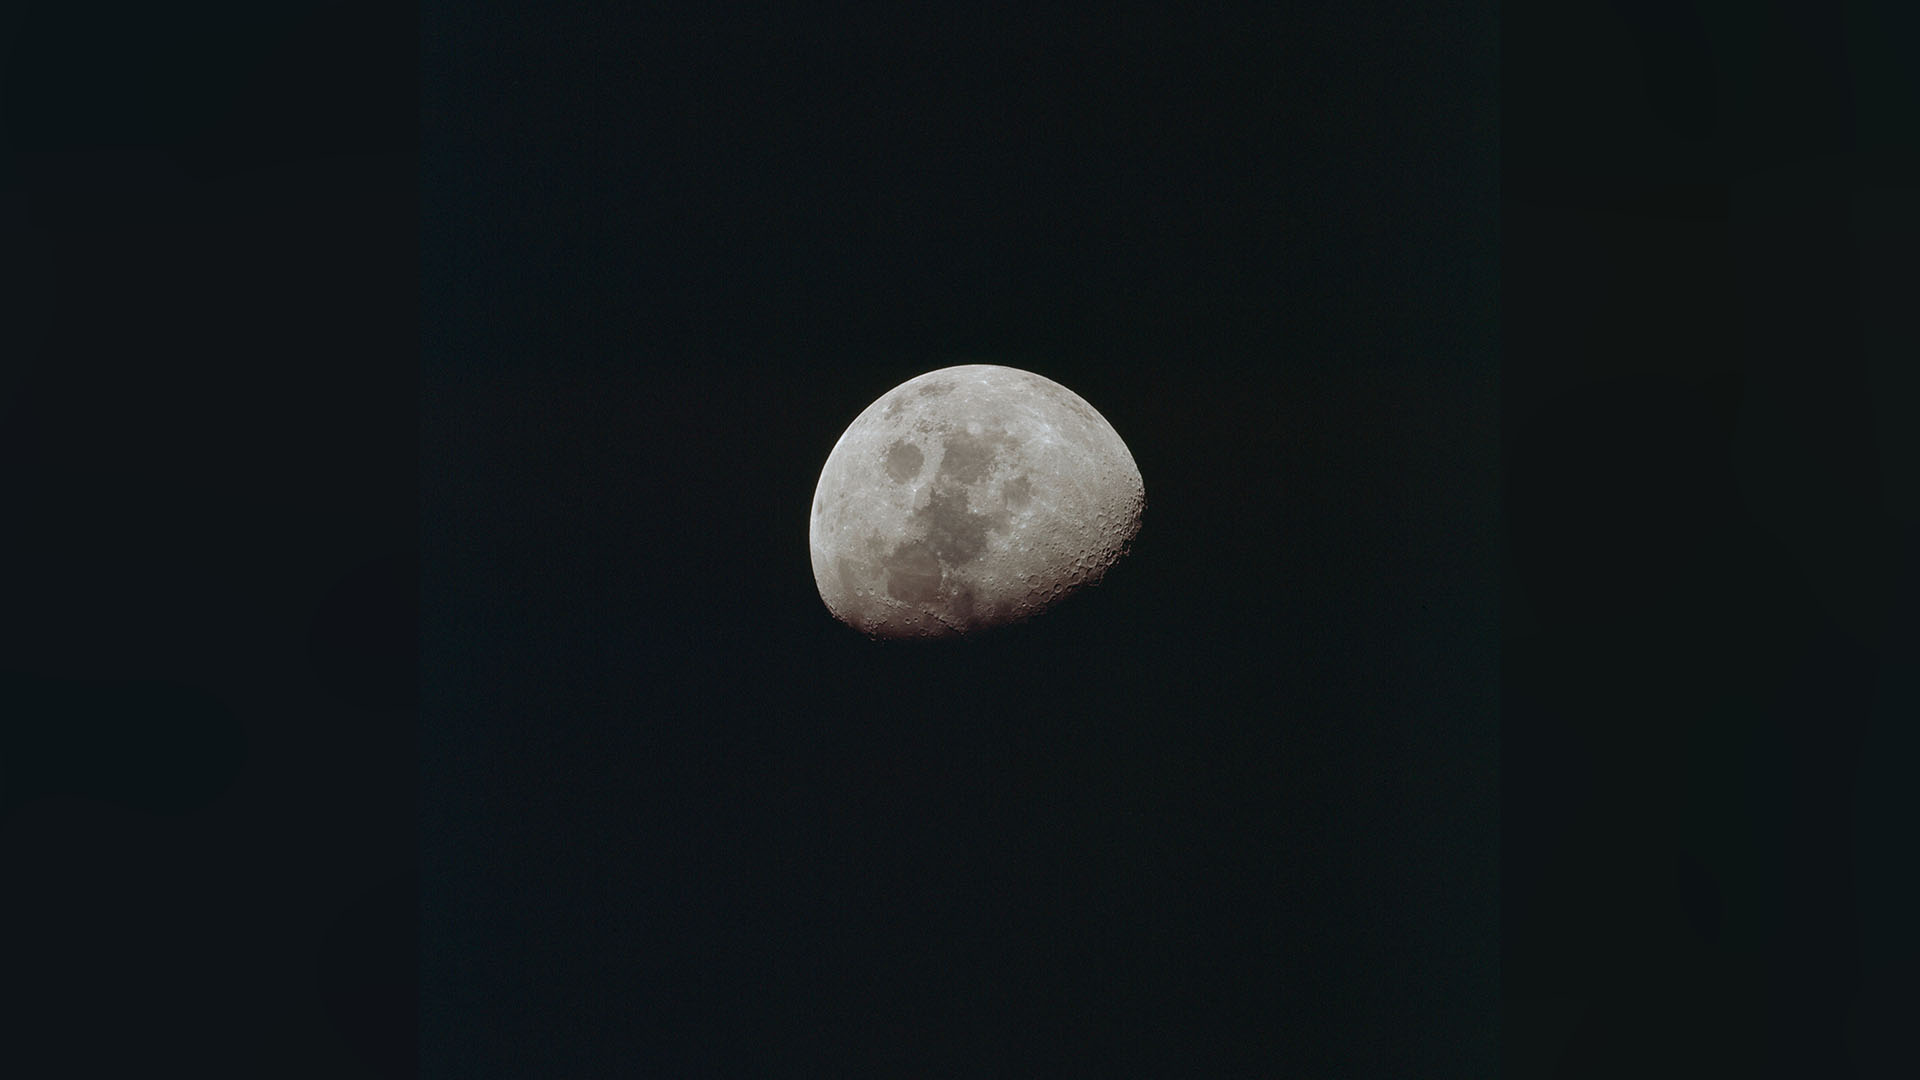 Photograph of moon after trans-Earth insertion.